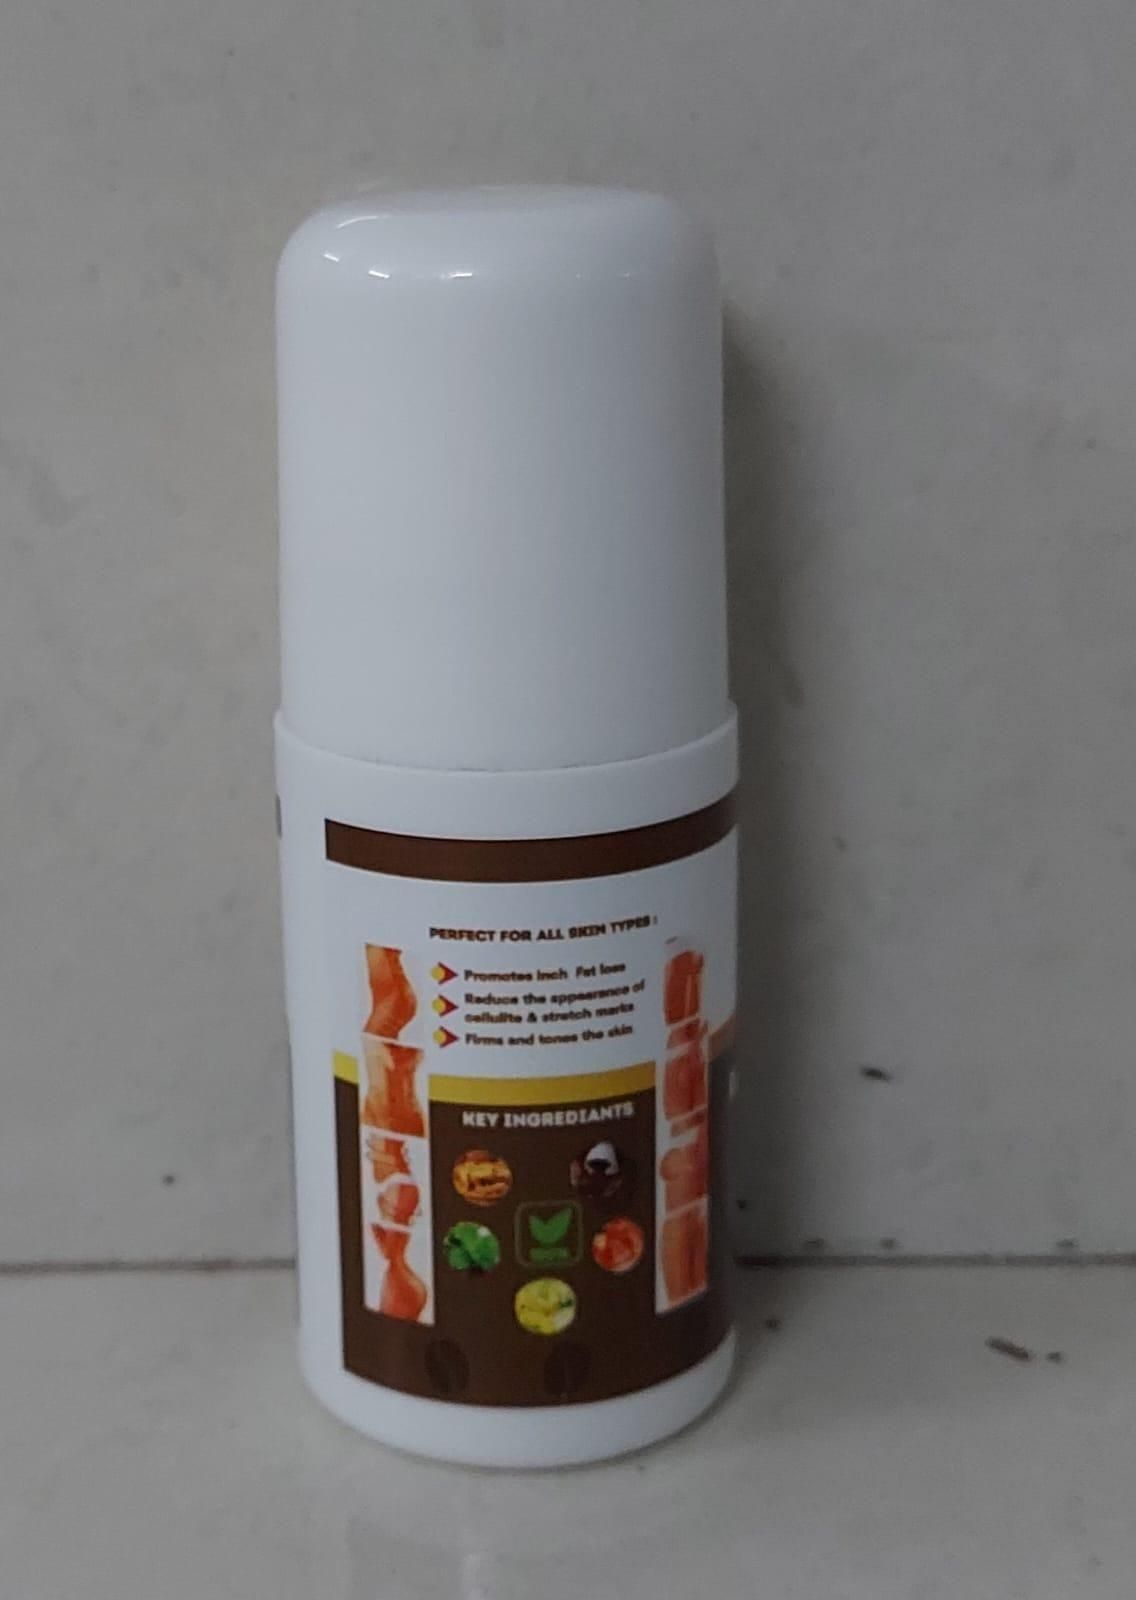 Active Caffeine Remove Swelling Cream - Deal IND.